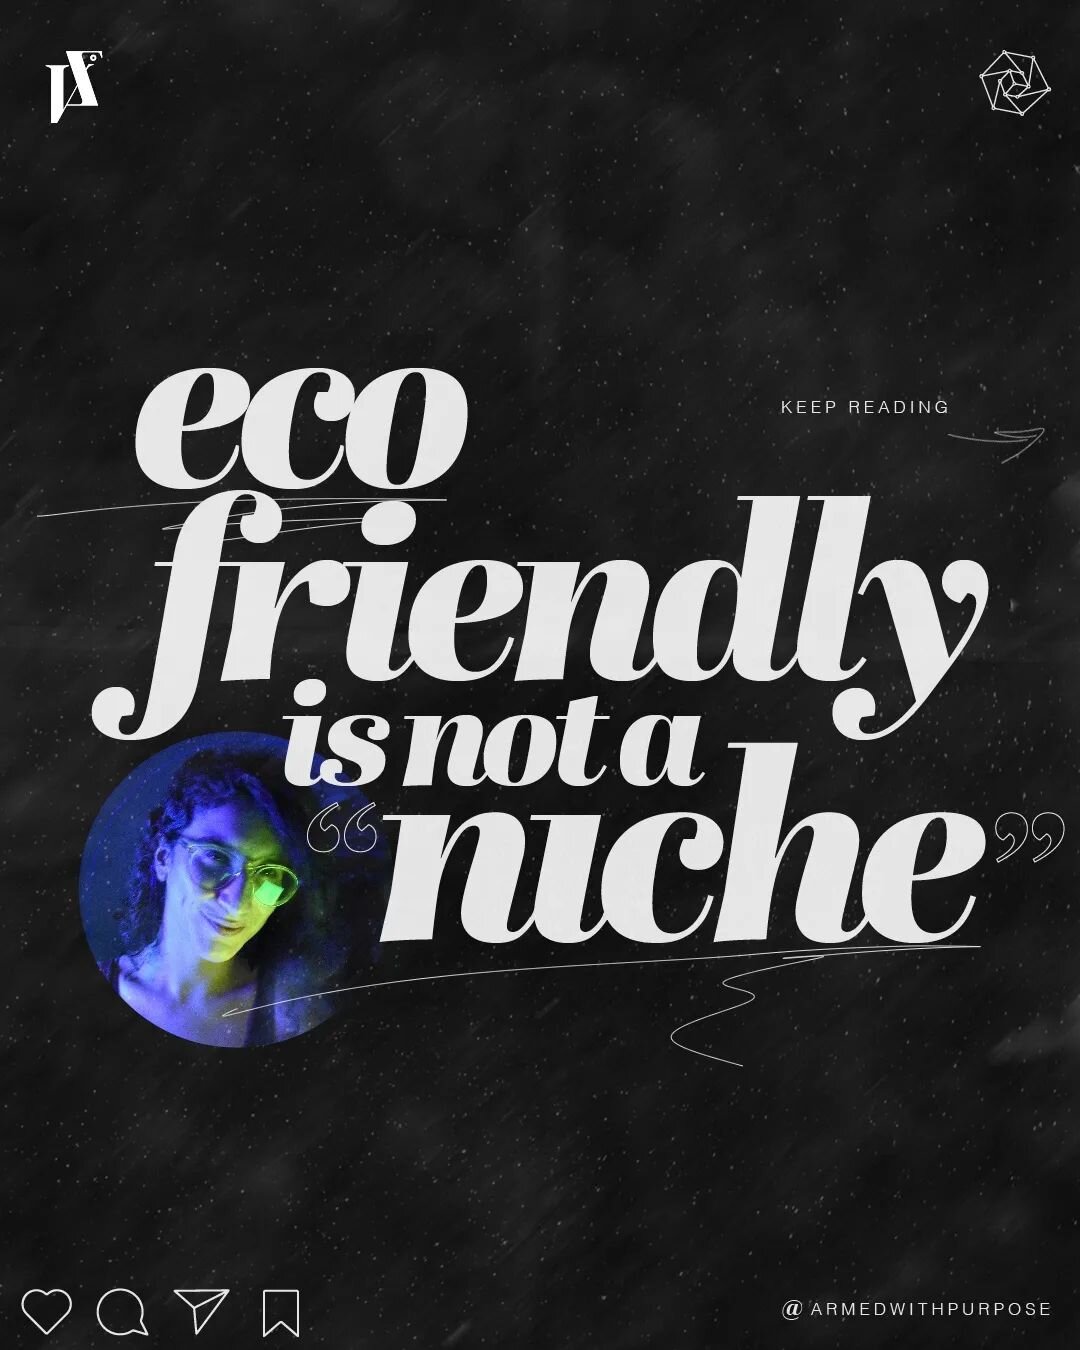 The term &quot;eco-friendly&quot; was created when humanity was not friendly to the Earth.

As we move toward a sustainable future, does that make this an outdated concept? 

It represents a POV that is literally dying off. There are reasons why thes